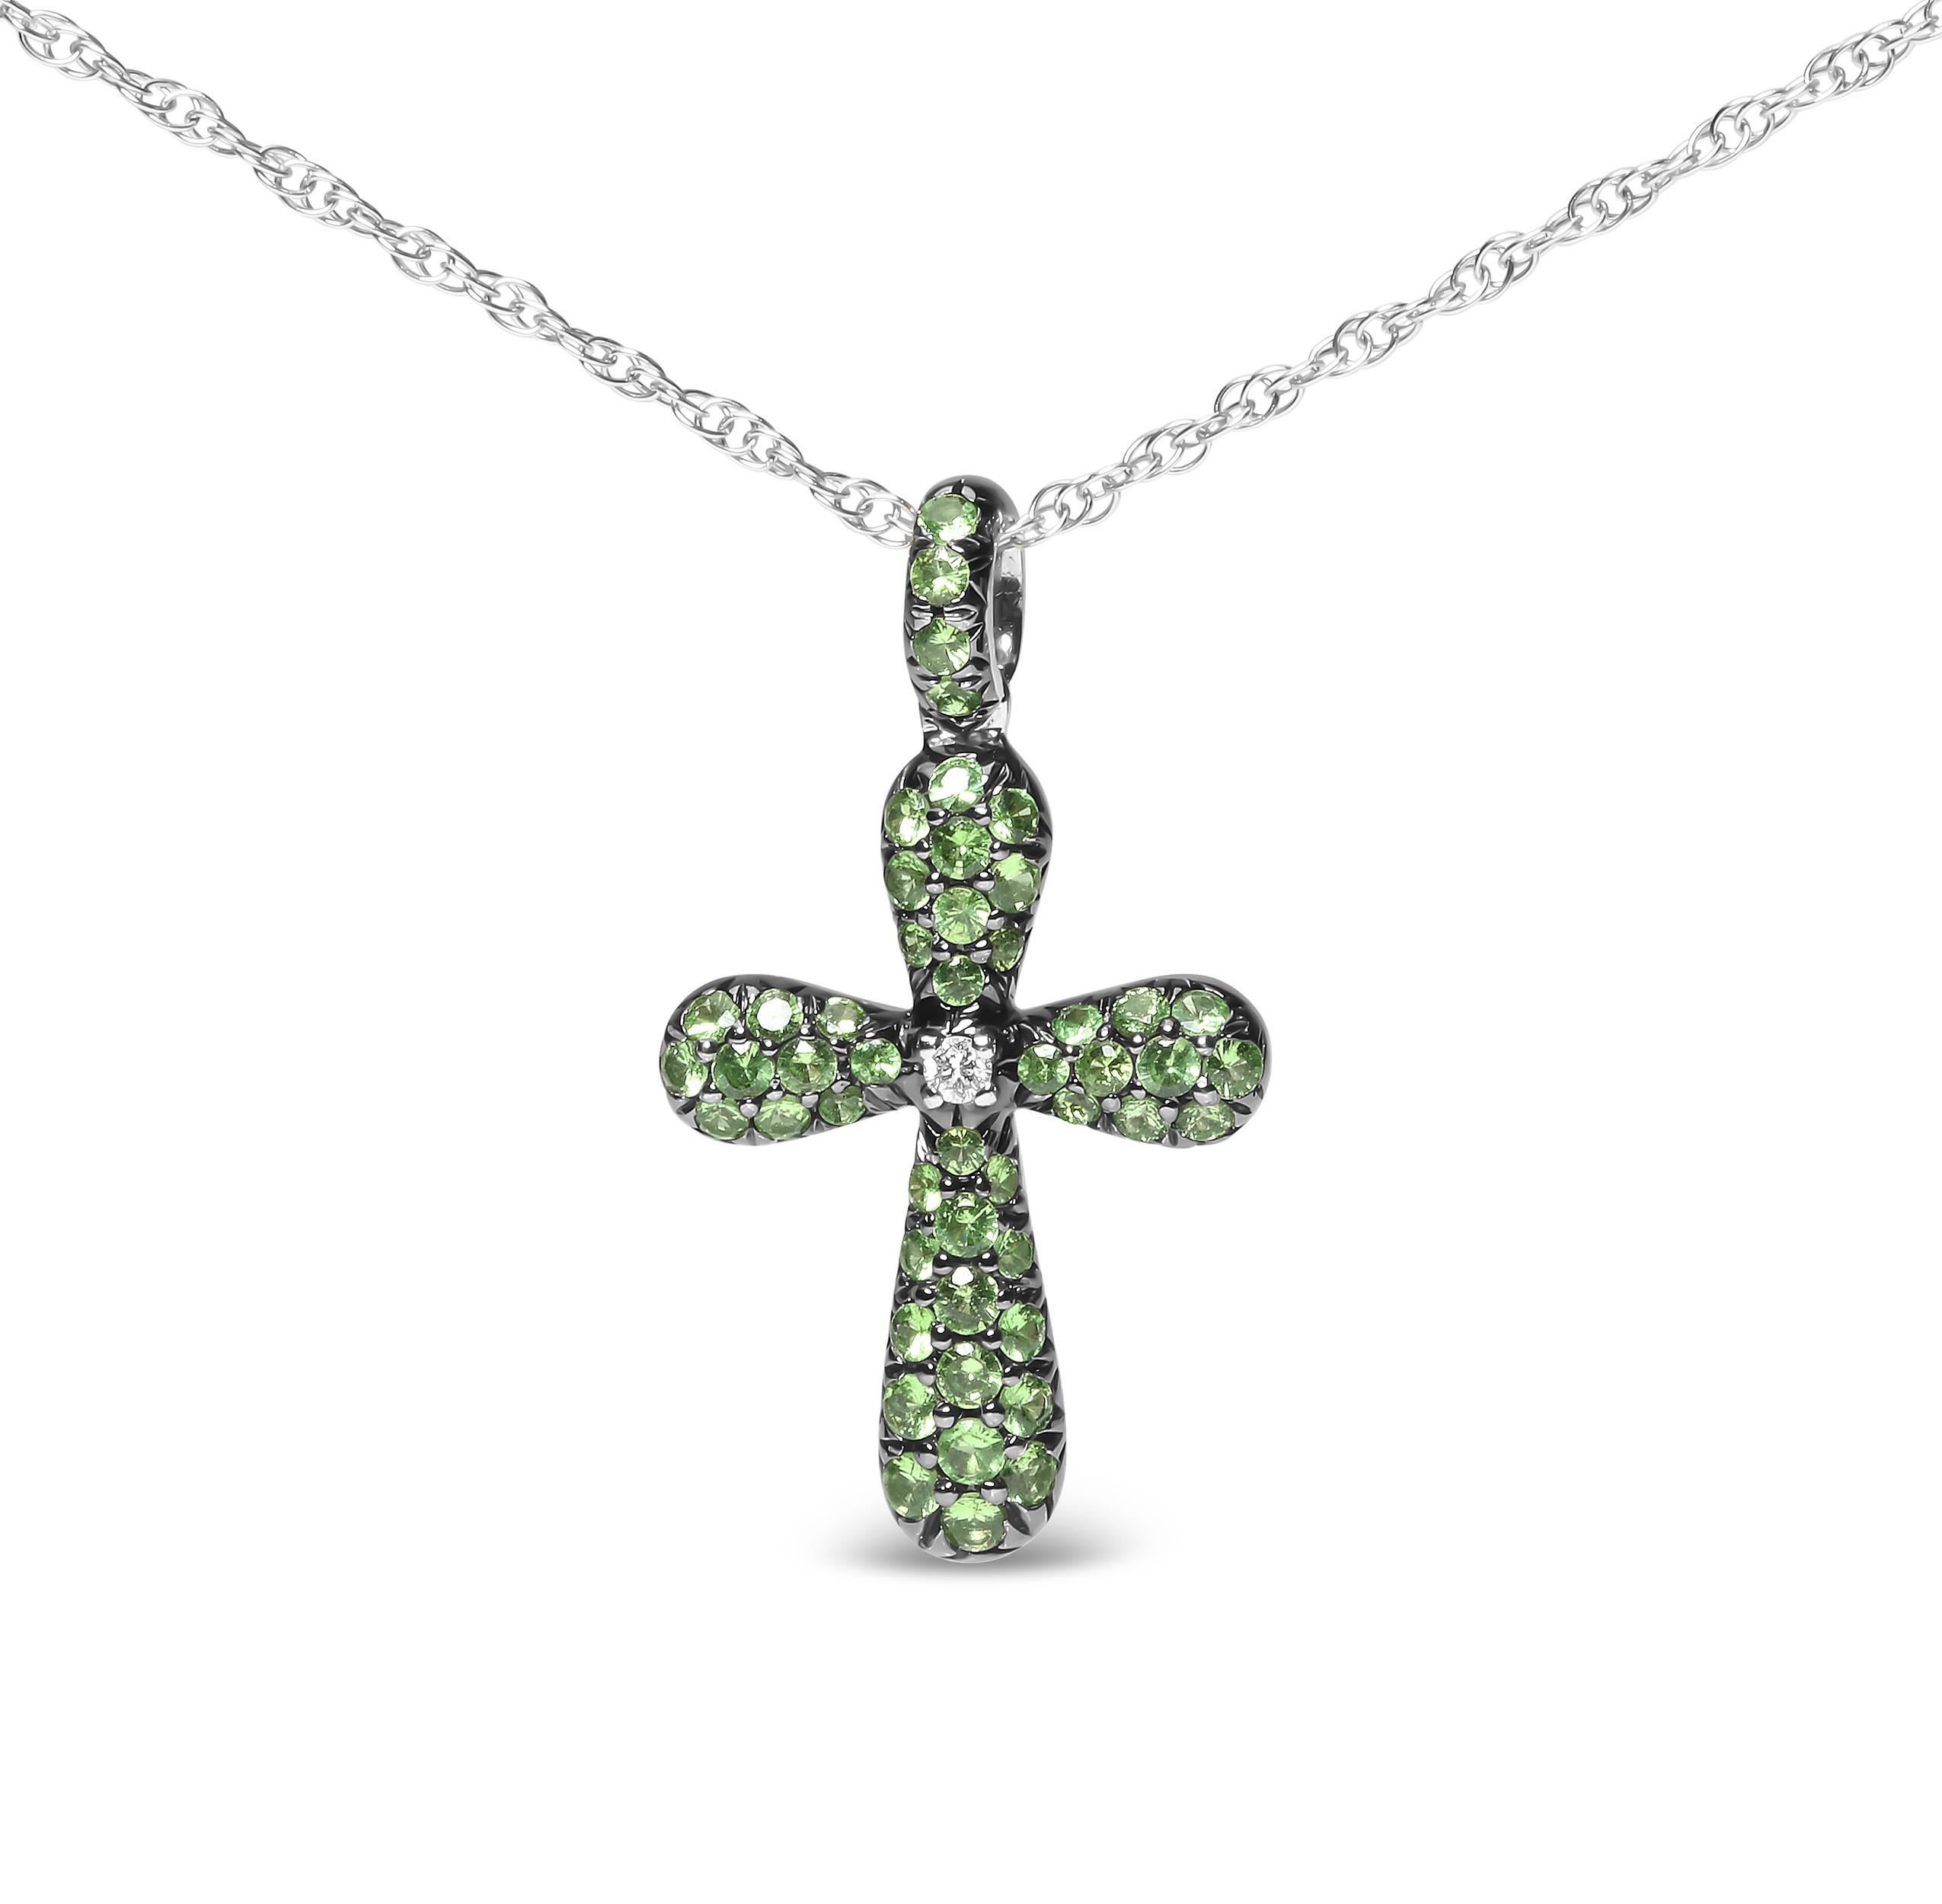 Give your ensembles a distinctive look by adding this faith-statement cross pendant necklace made of black rhodium plated 18k white gold. The cross silhouette is comprised of natural 1.6 x 1.6mm round heat-treated green tsavorite gemstones,